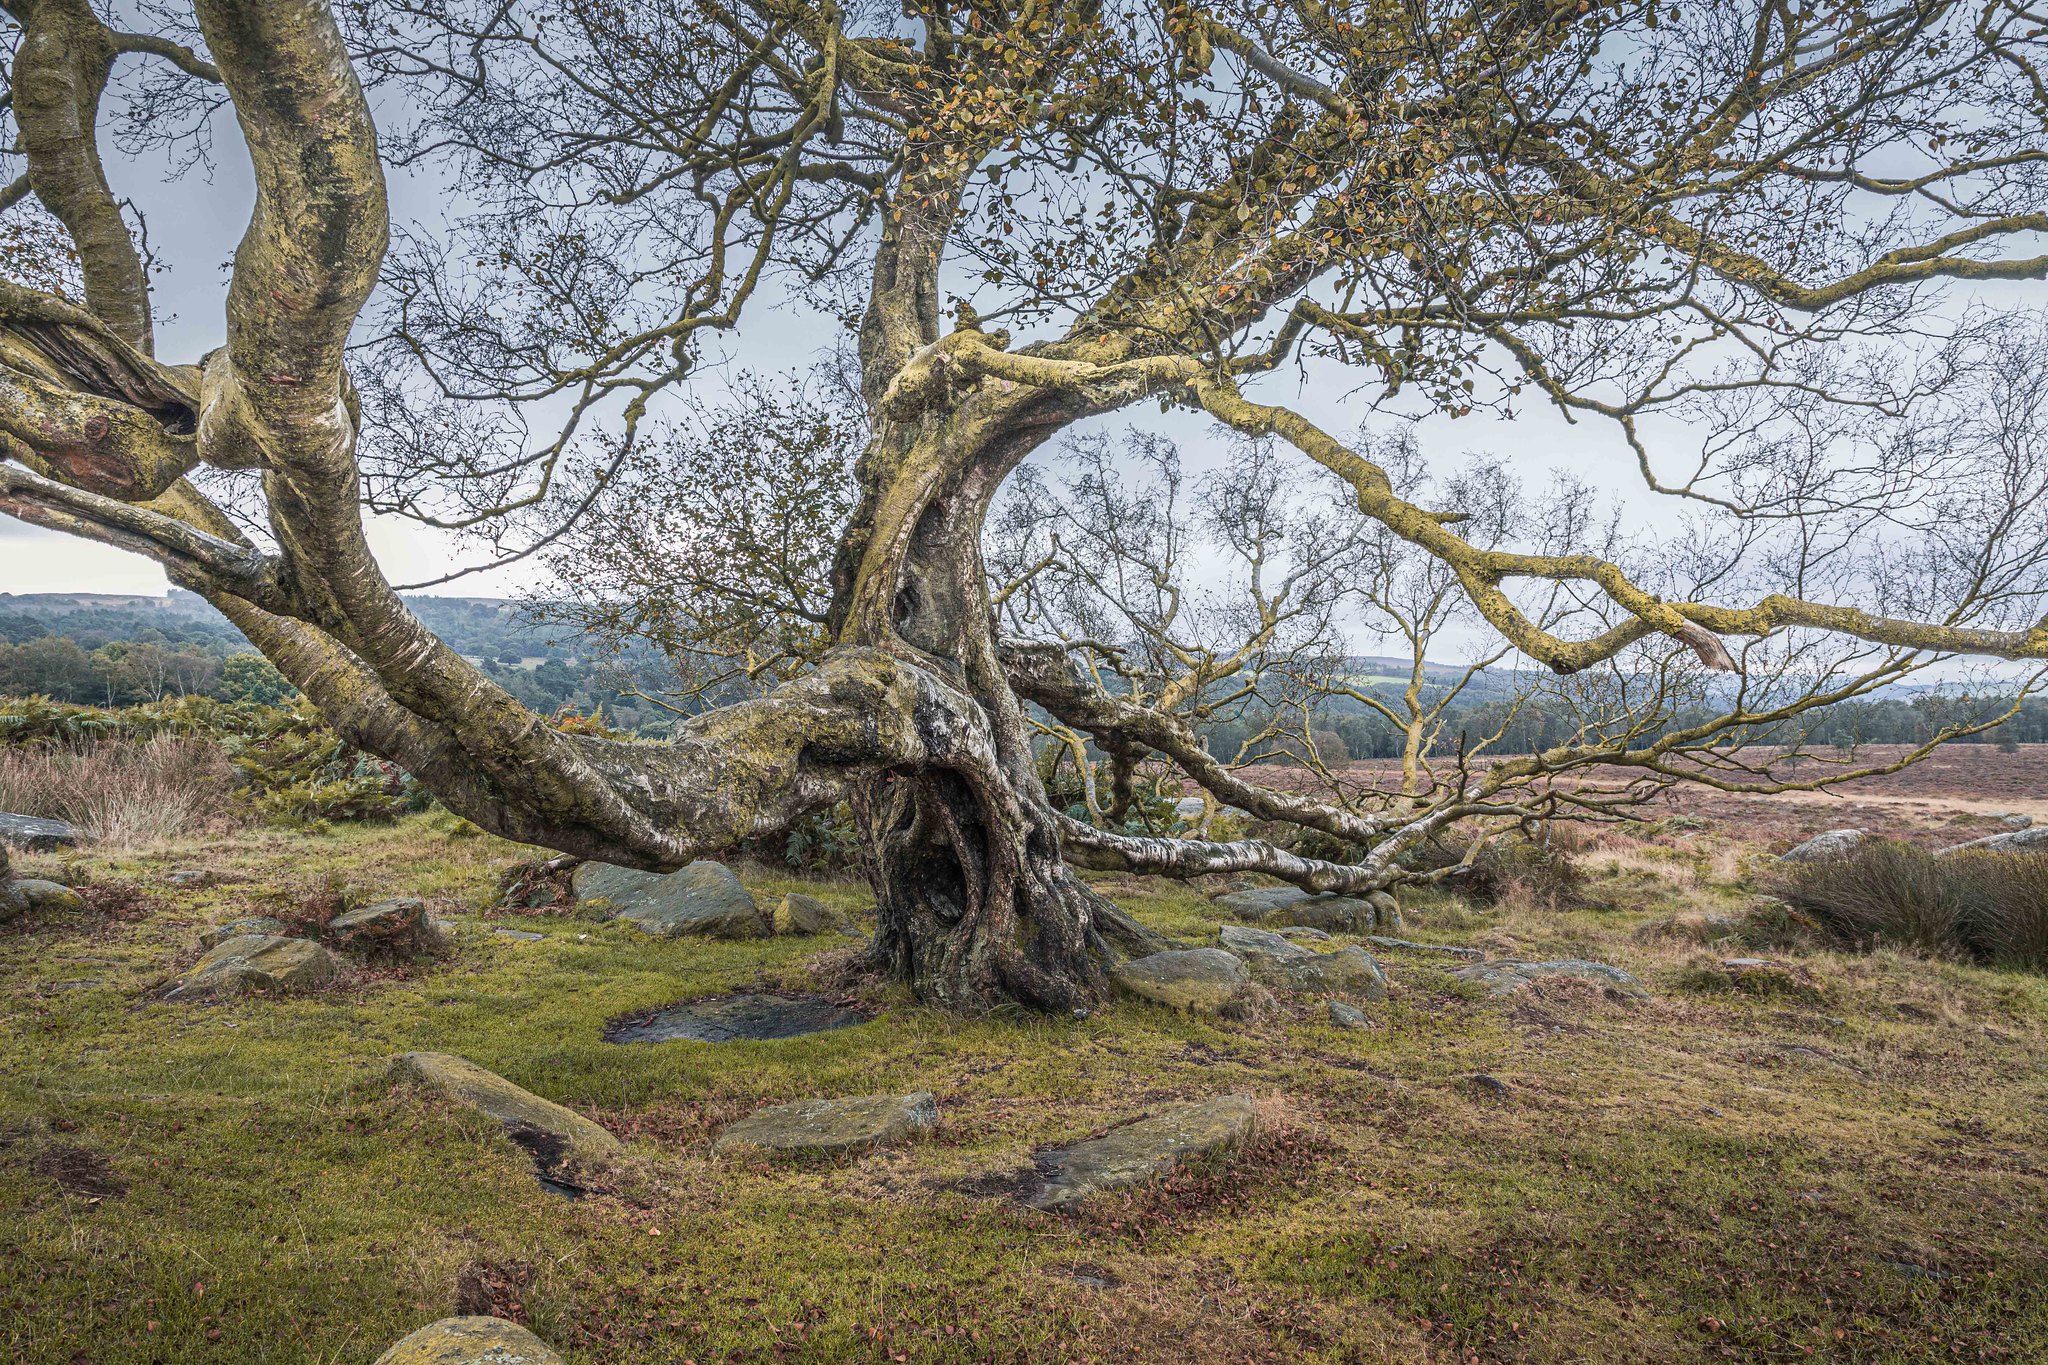 Old, twisted Silver Birch tree near Owler Tor in the Peak District.